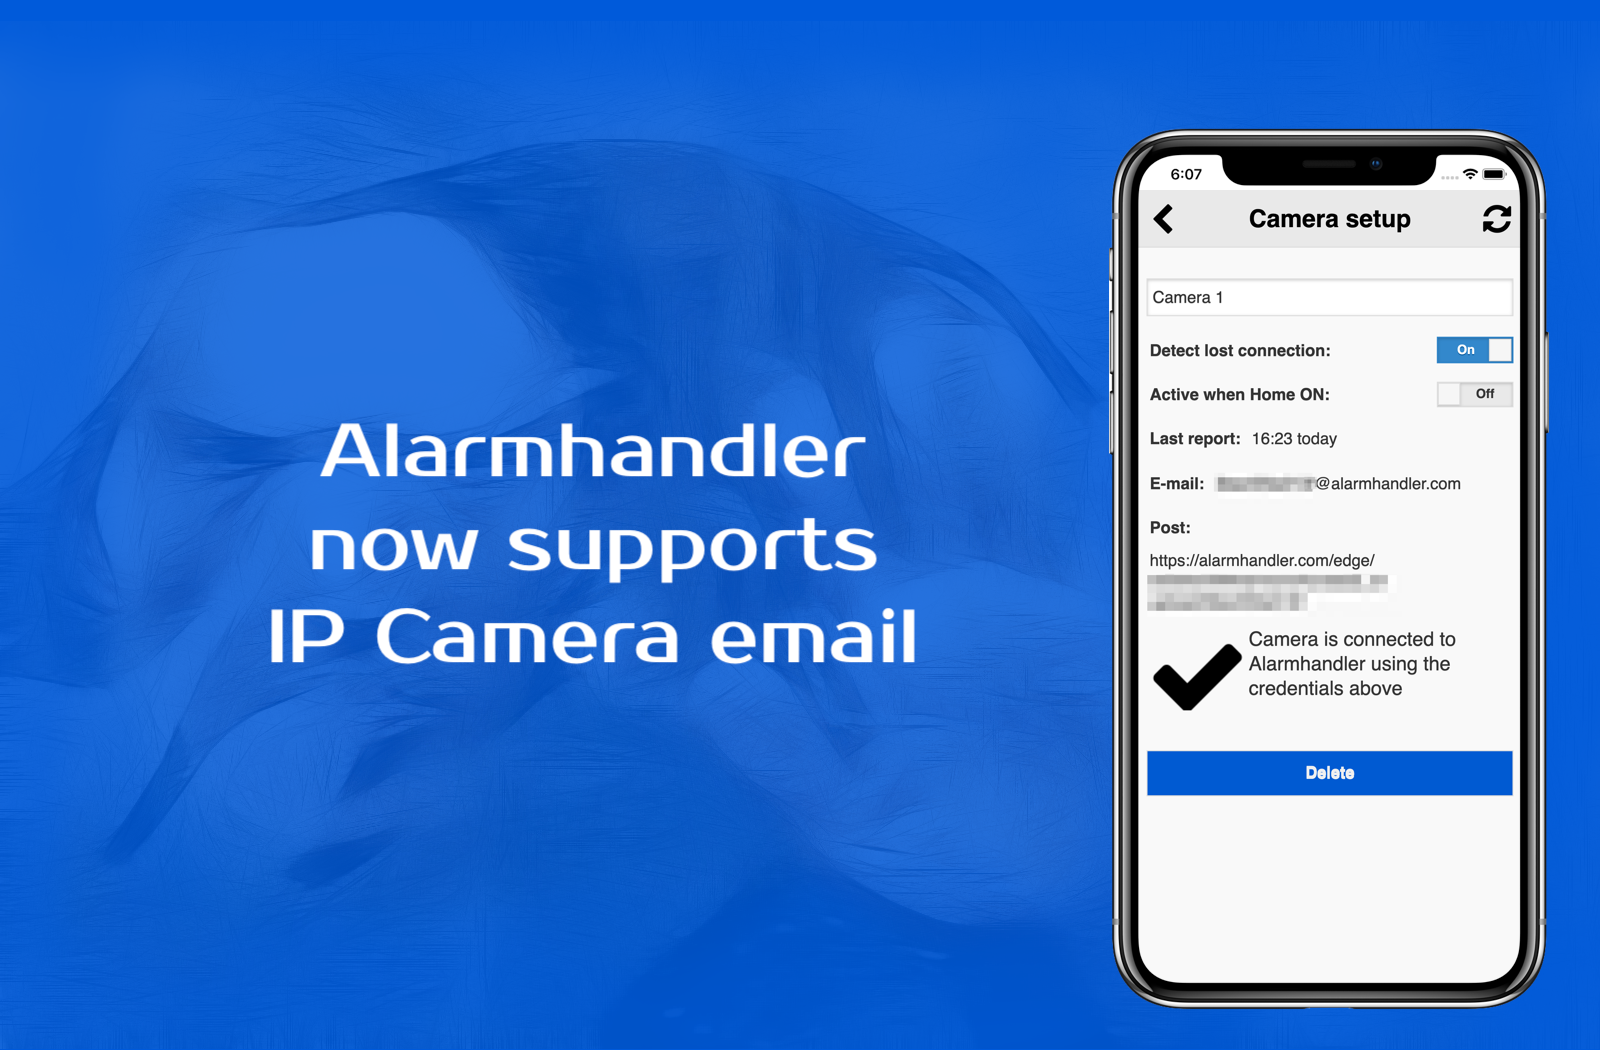 Alarmhandler now support IP camera email